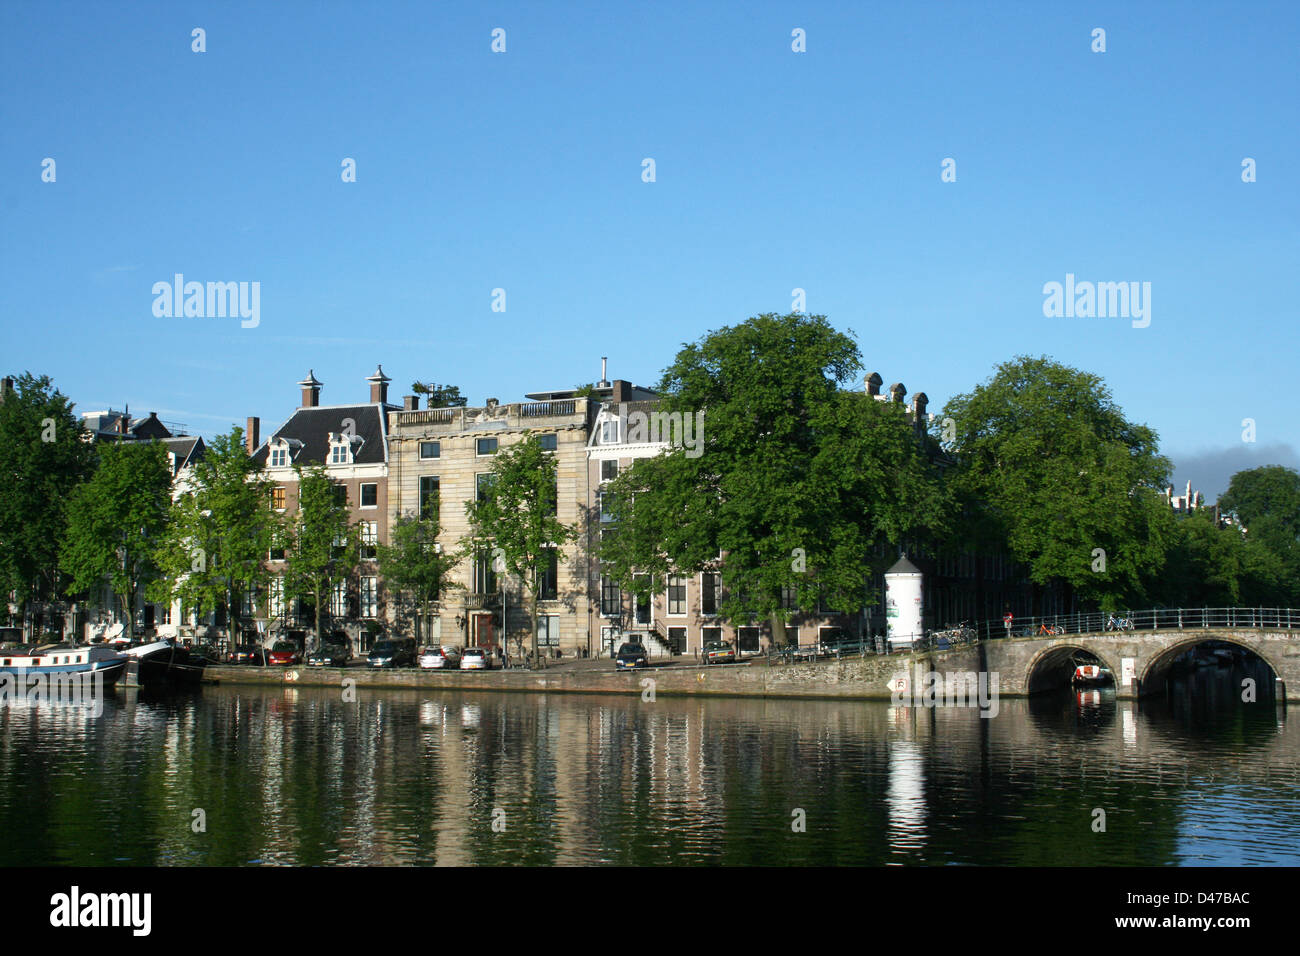 The Netherlands Amsterdam River Amstel Herengracht Stock Photo